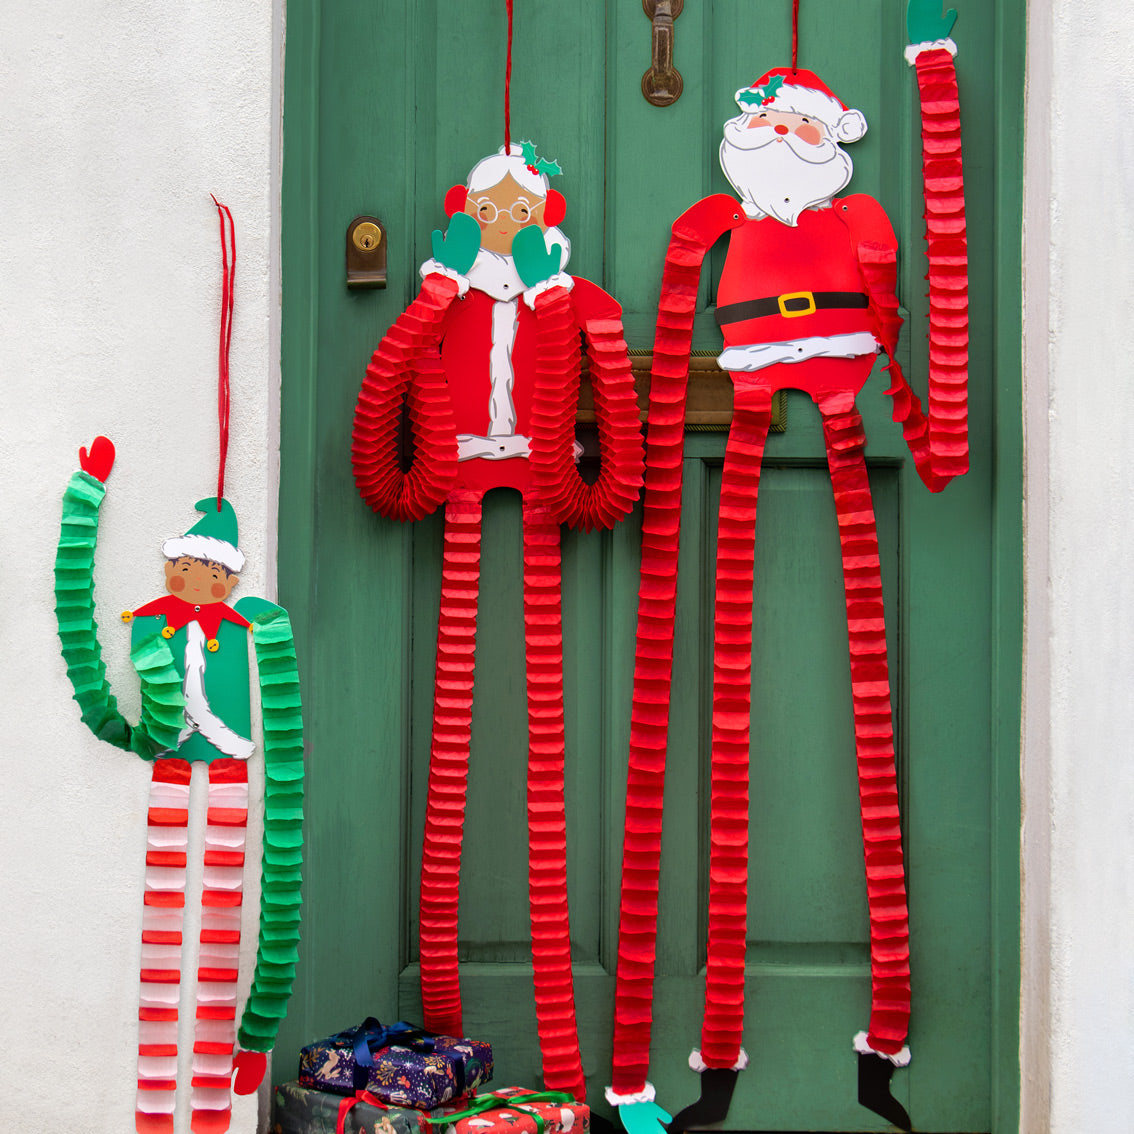 An image of a green house door decorated with Christmas figures with long concertina paper arms and legs.